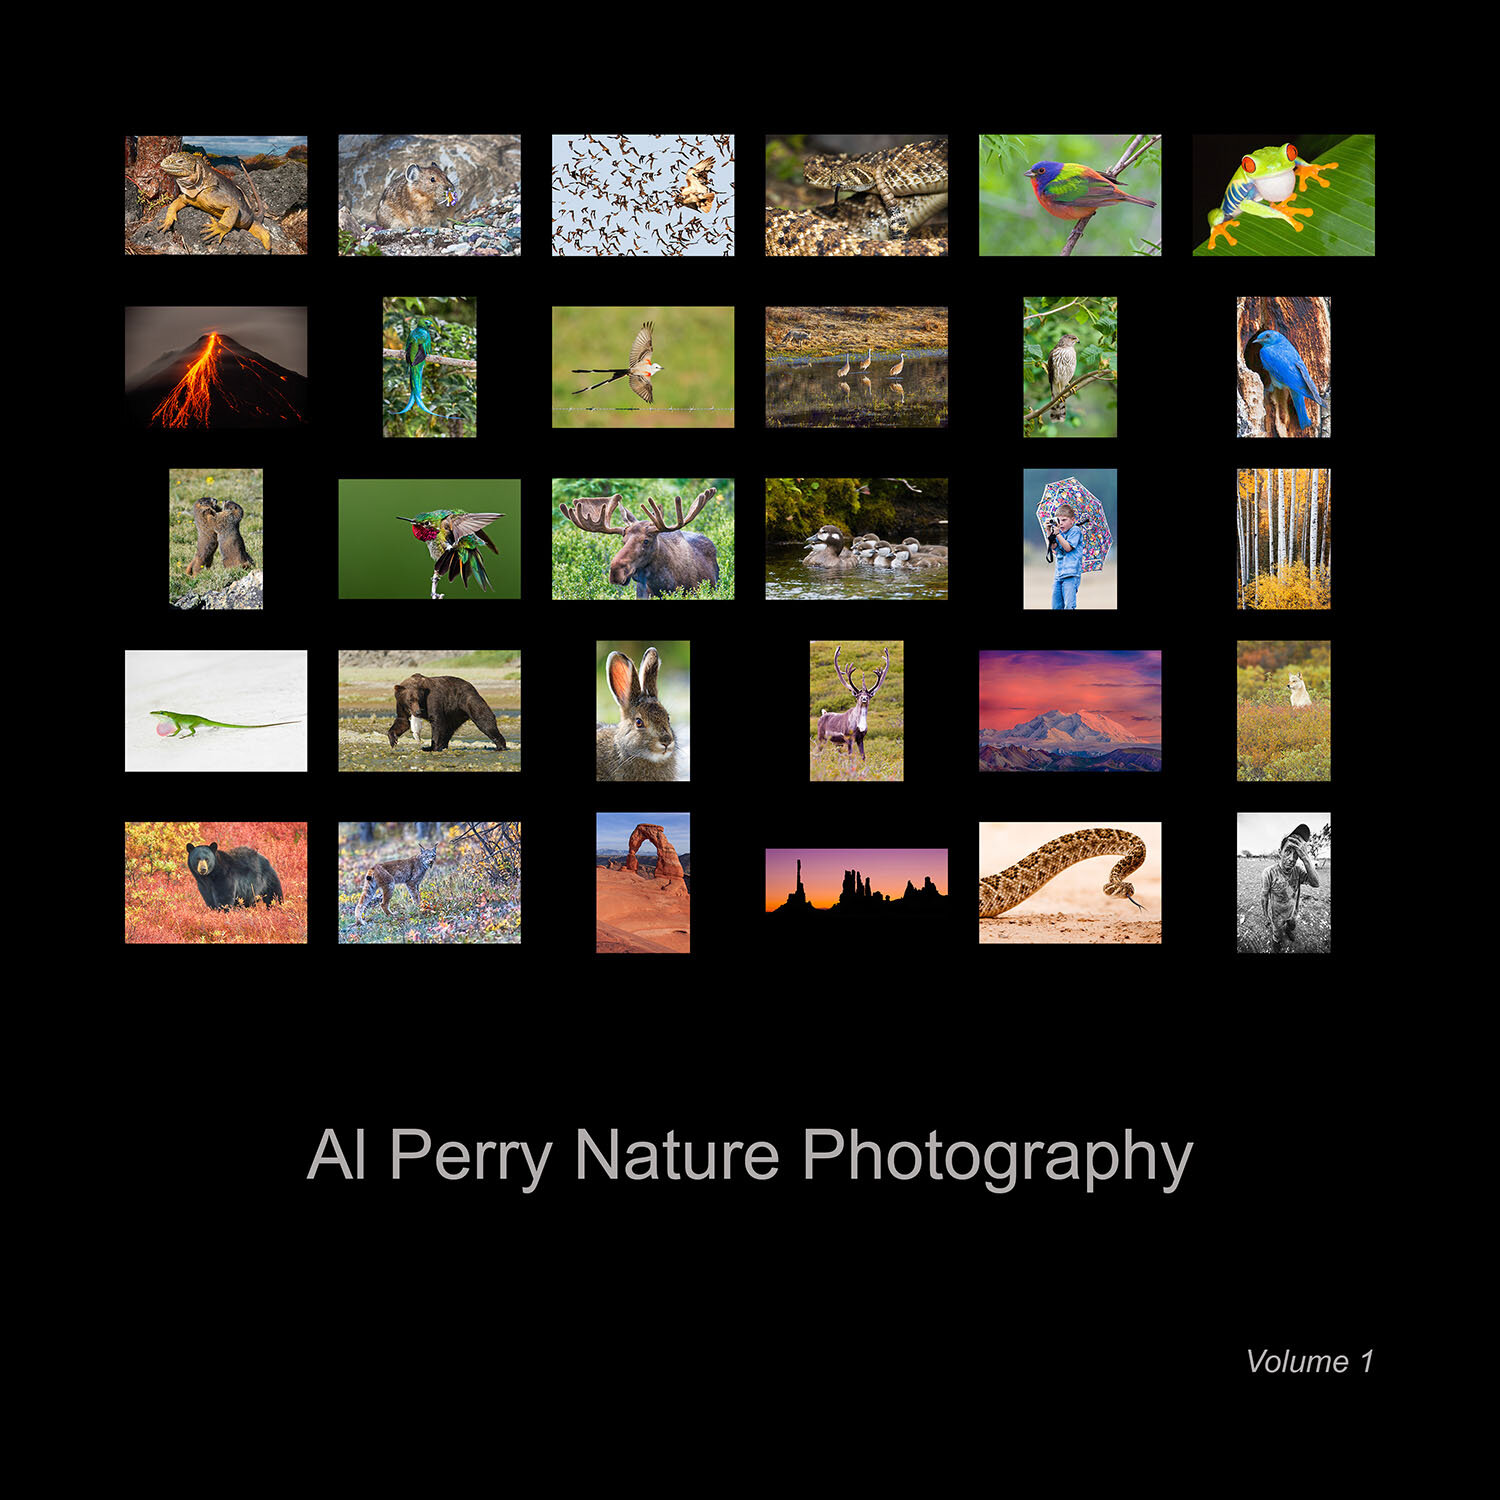 Al Perry Nature Photography Volume 1